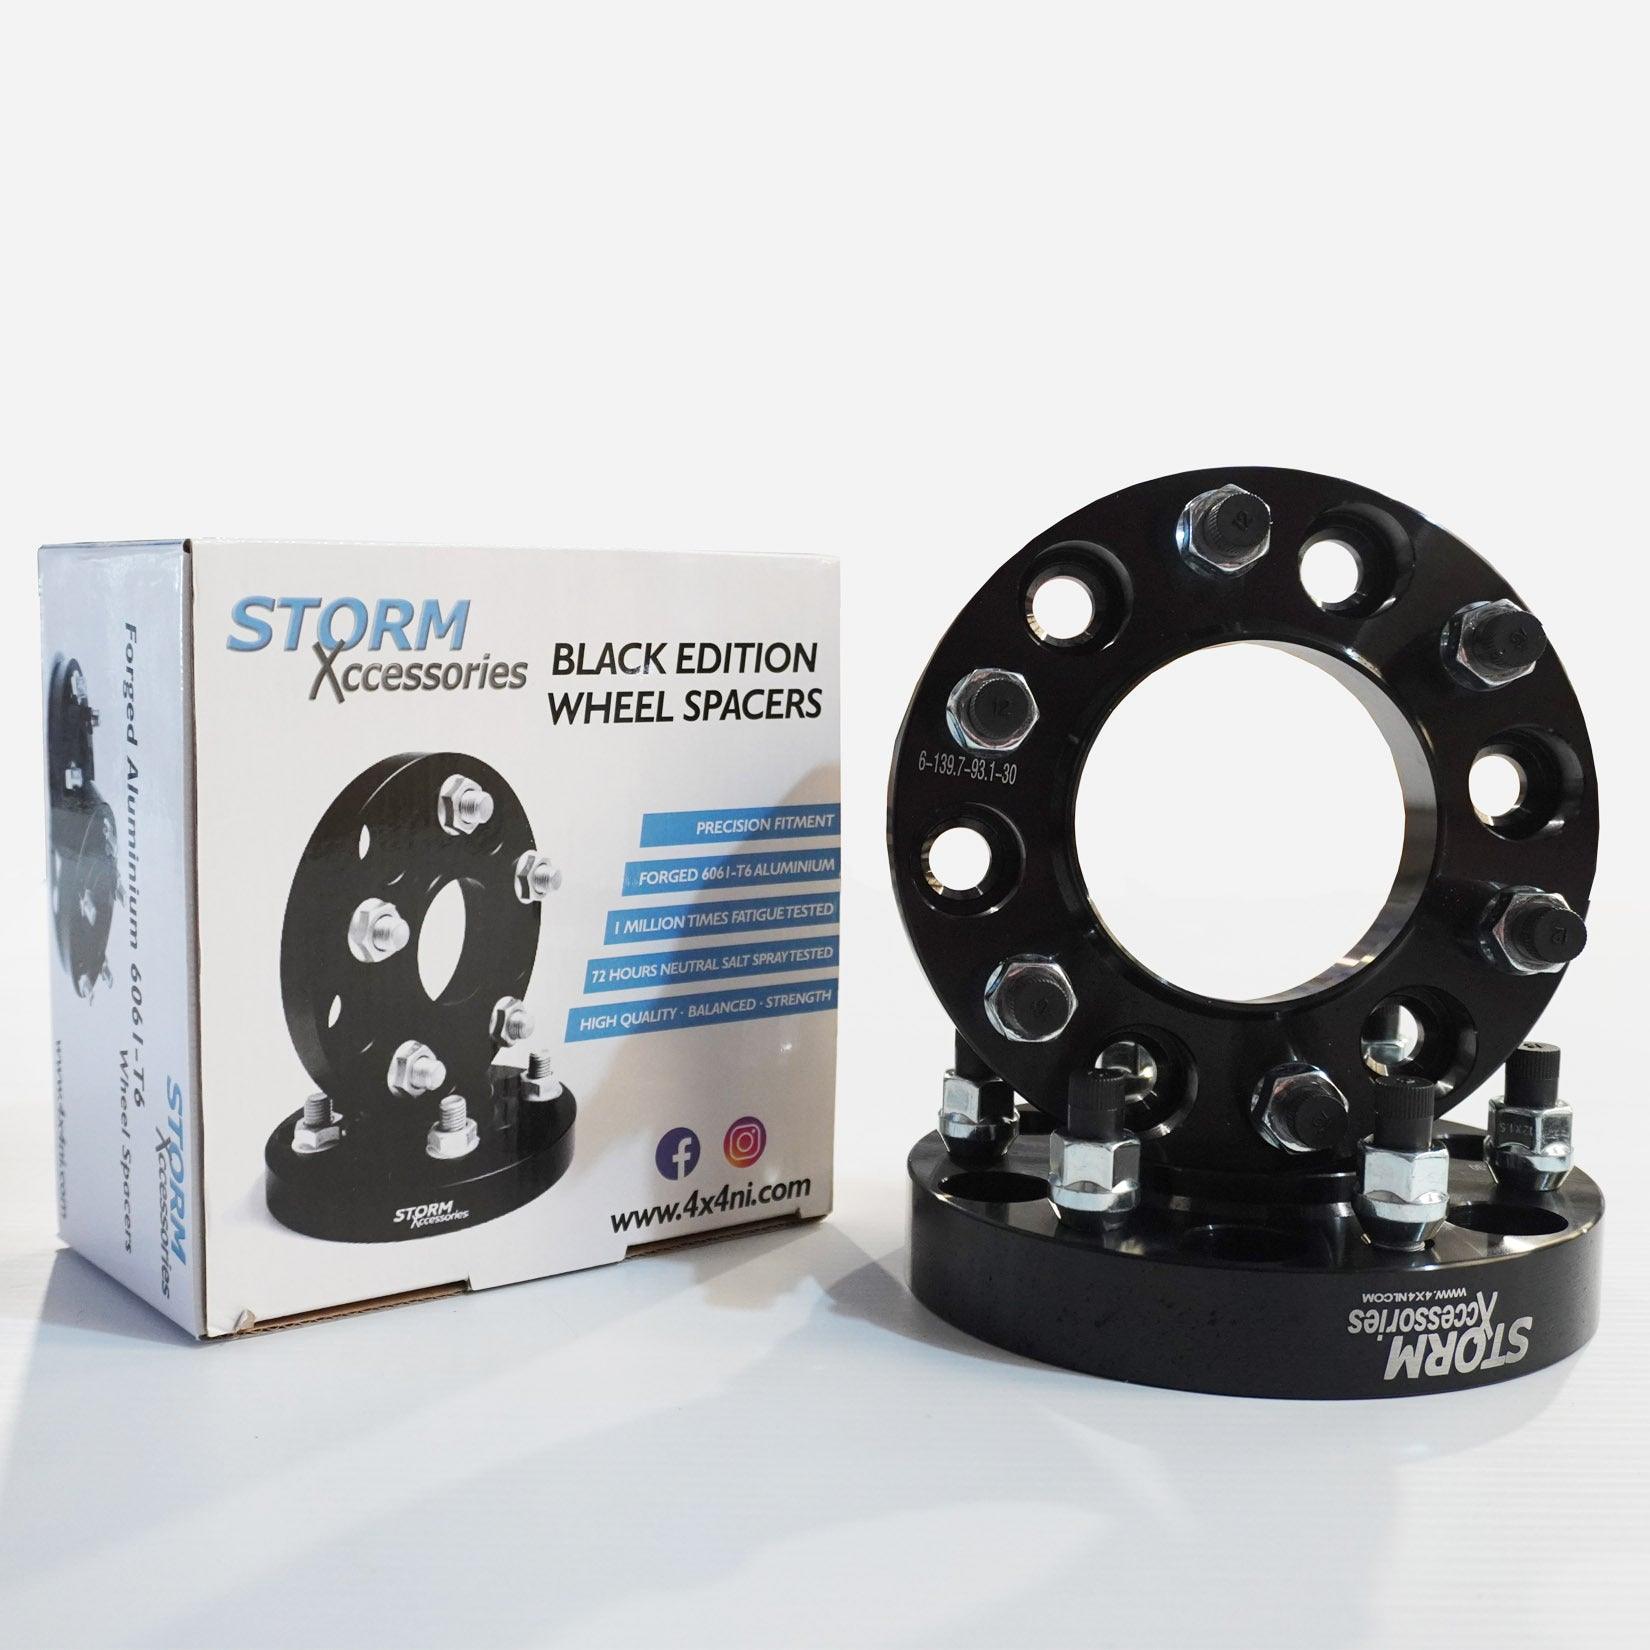 NISSAN NAVARA 6x114.3 25MM WHEEL SPACERS WITH HUB CENTRIC- BLACK (OFF ROAD USE) - Storm Xccessories2